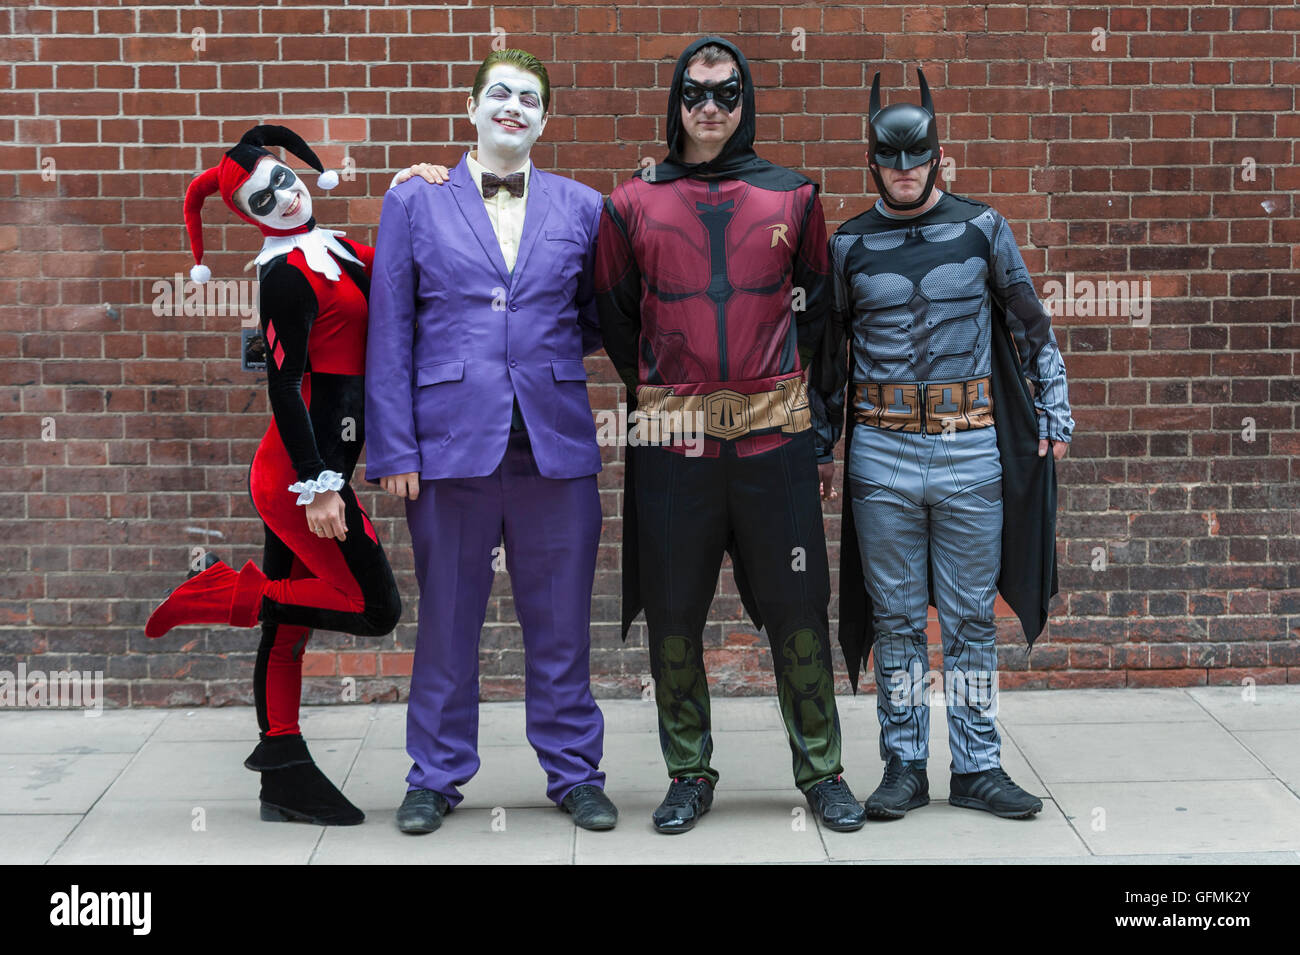 London, UK. 31 July 2016. A group dressed as (L to R) Harley Quin, The Joker,  Robin and Batman join fans in their favourite costumes as they visit London  Film and Comic